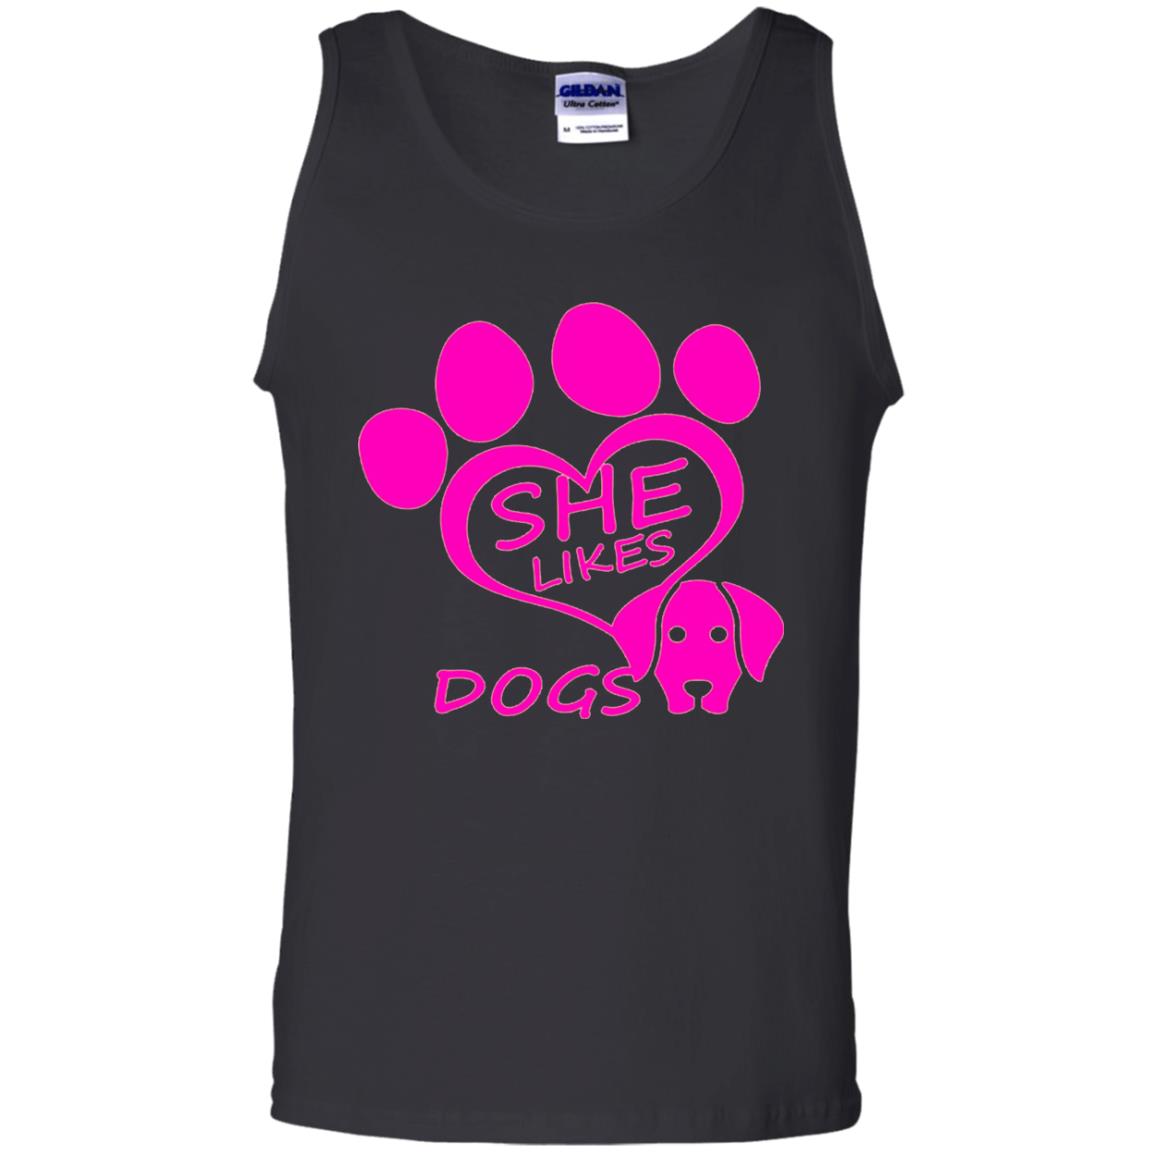 Dog Lovers Shirt She Likes Dogs